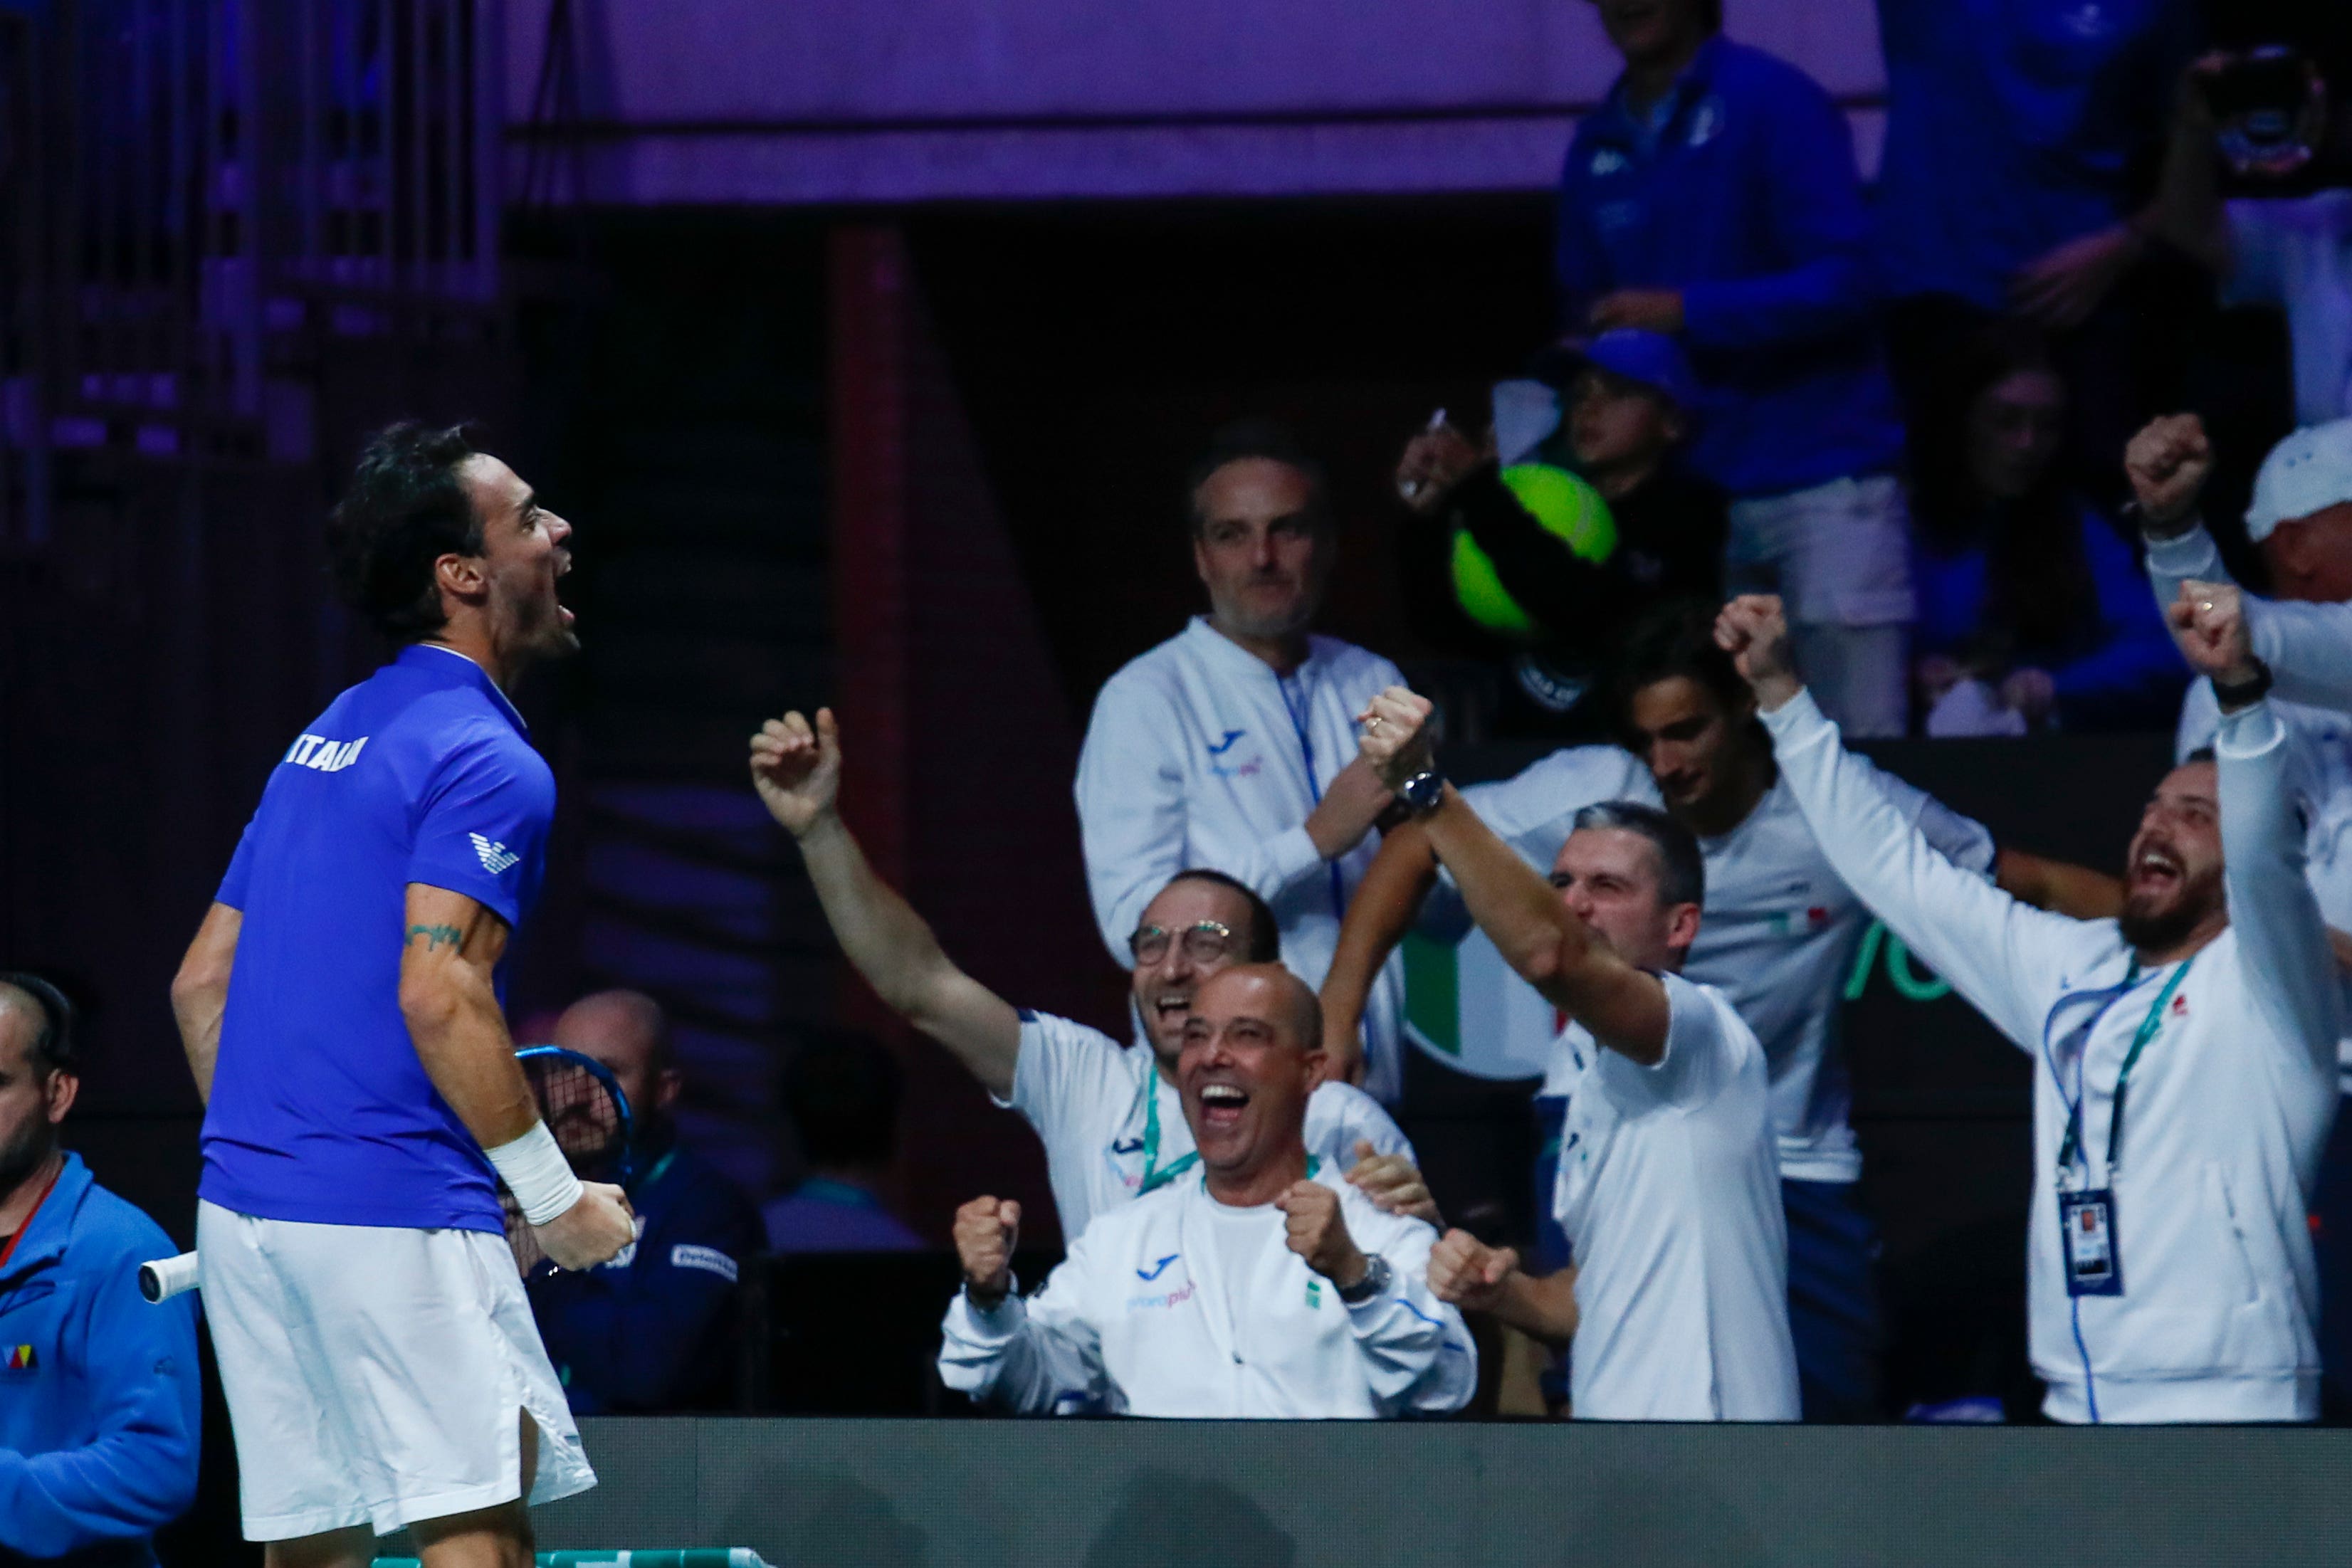 Fabio Fognini celebrates helping secure Italy’s victory (Joan Monfort/AP)